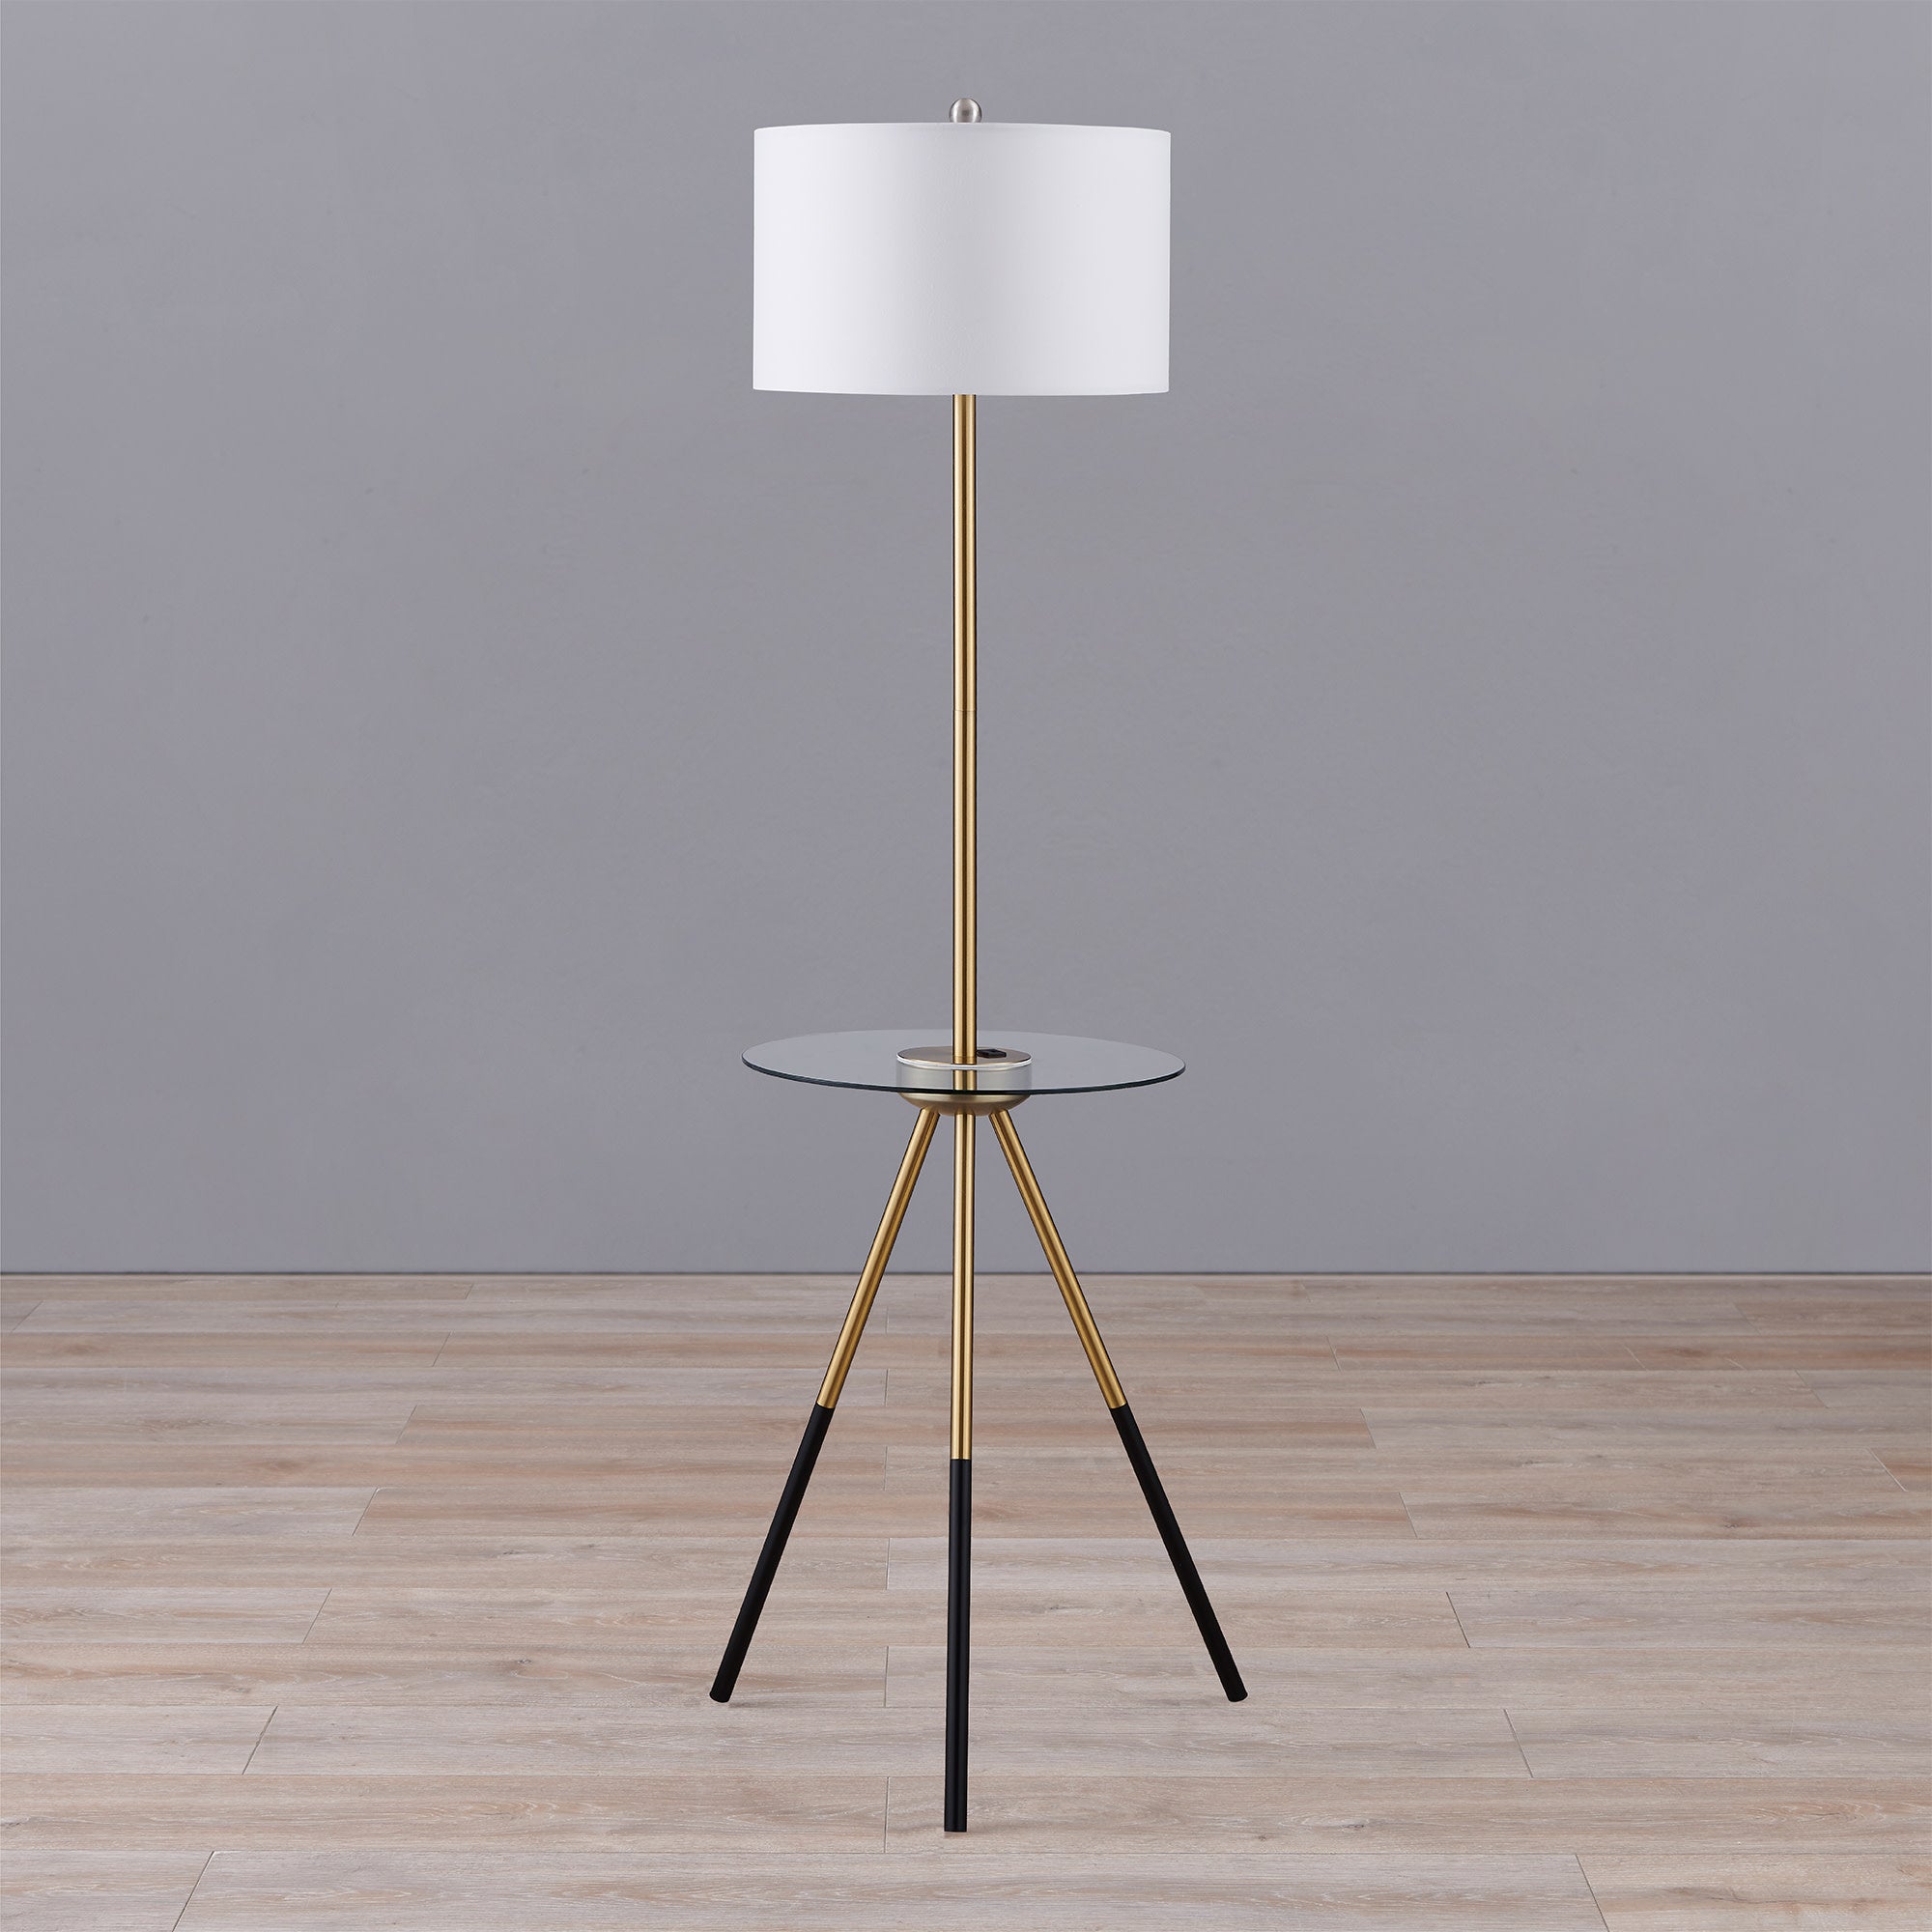 Teamson Home Myra Floor Lamp with Glass Table and Built-In USB Port, Gold/Black